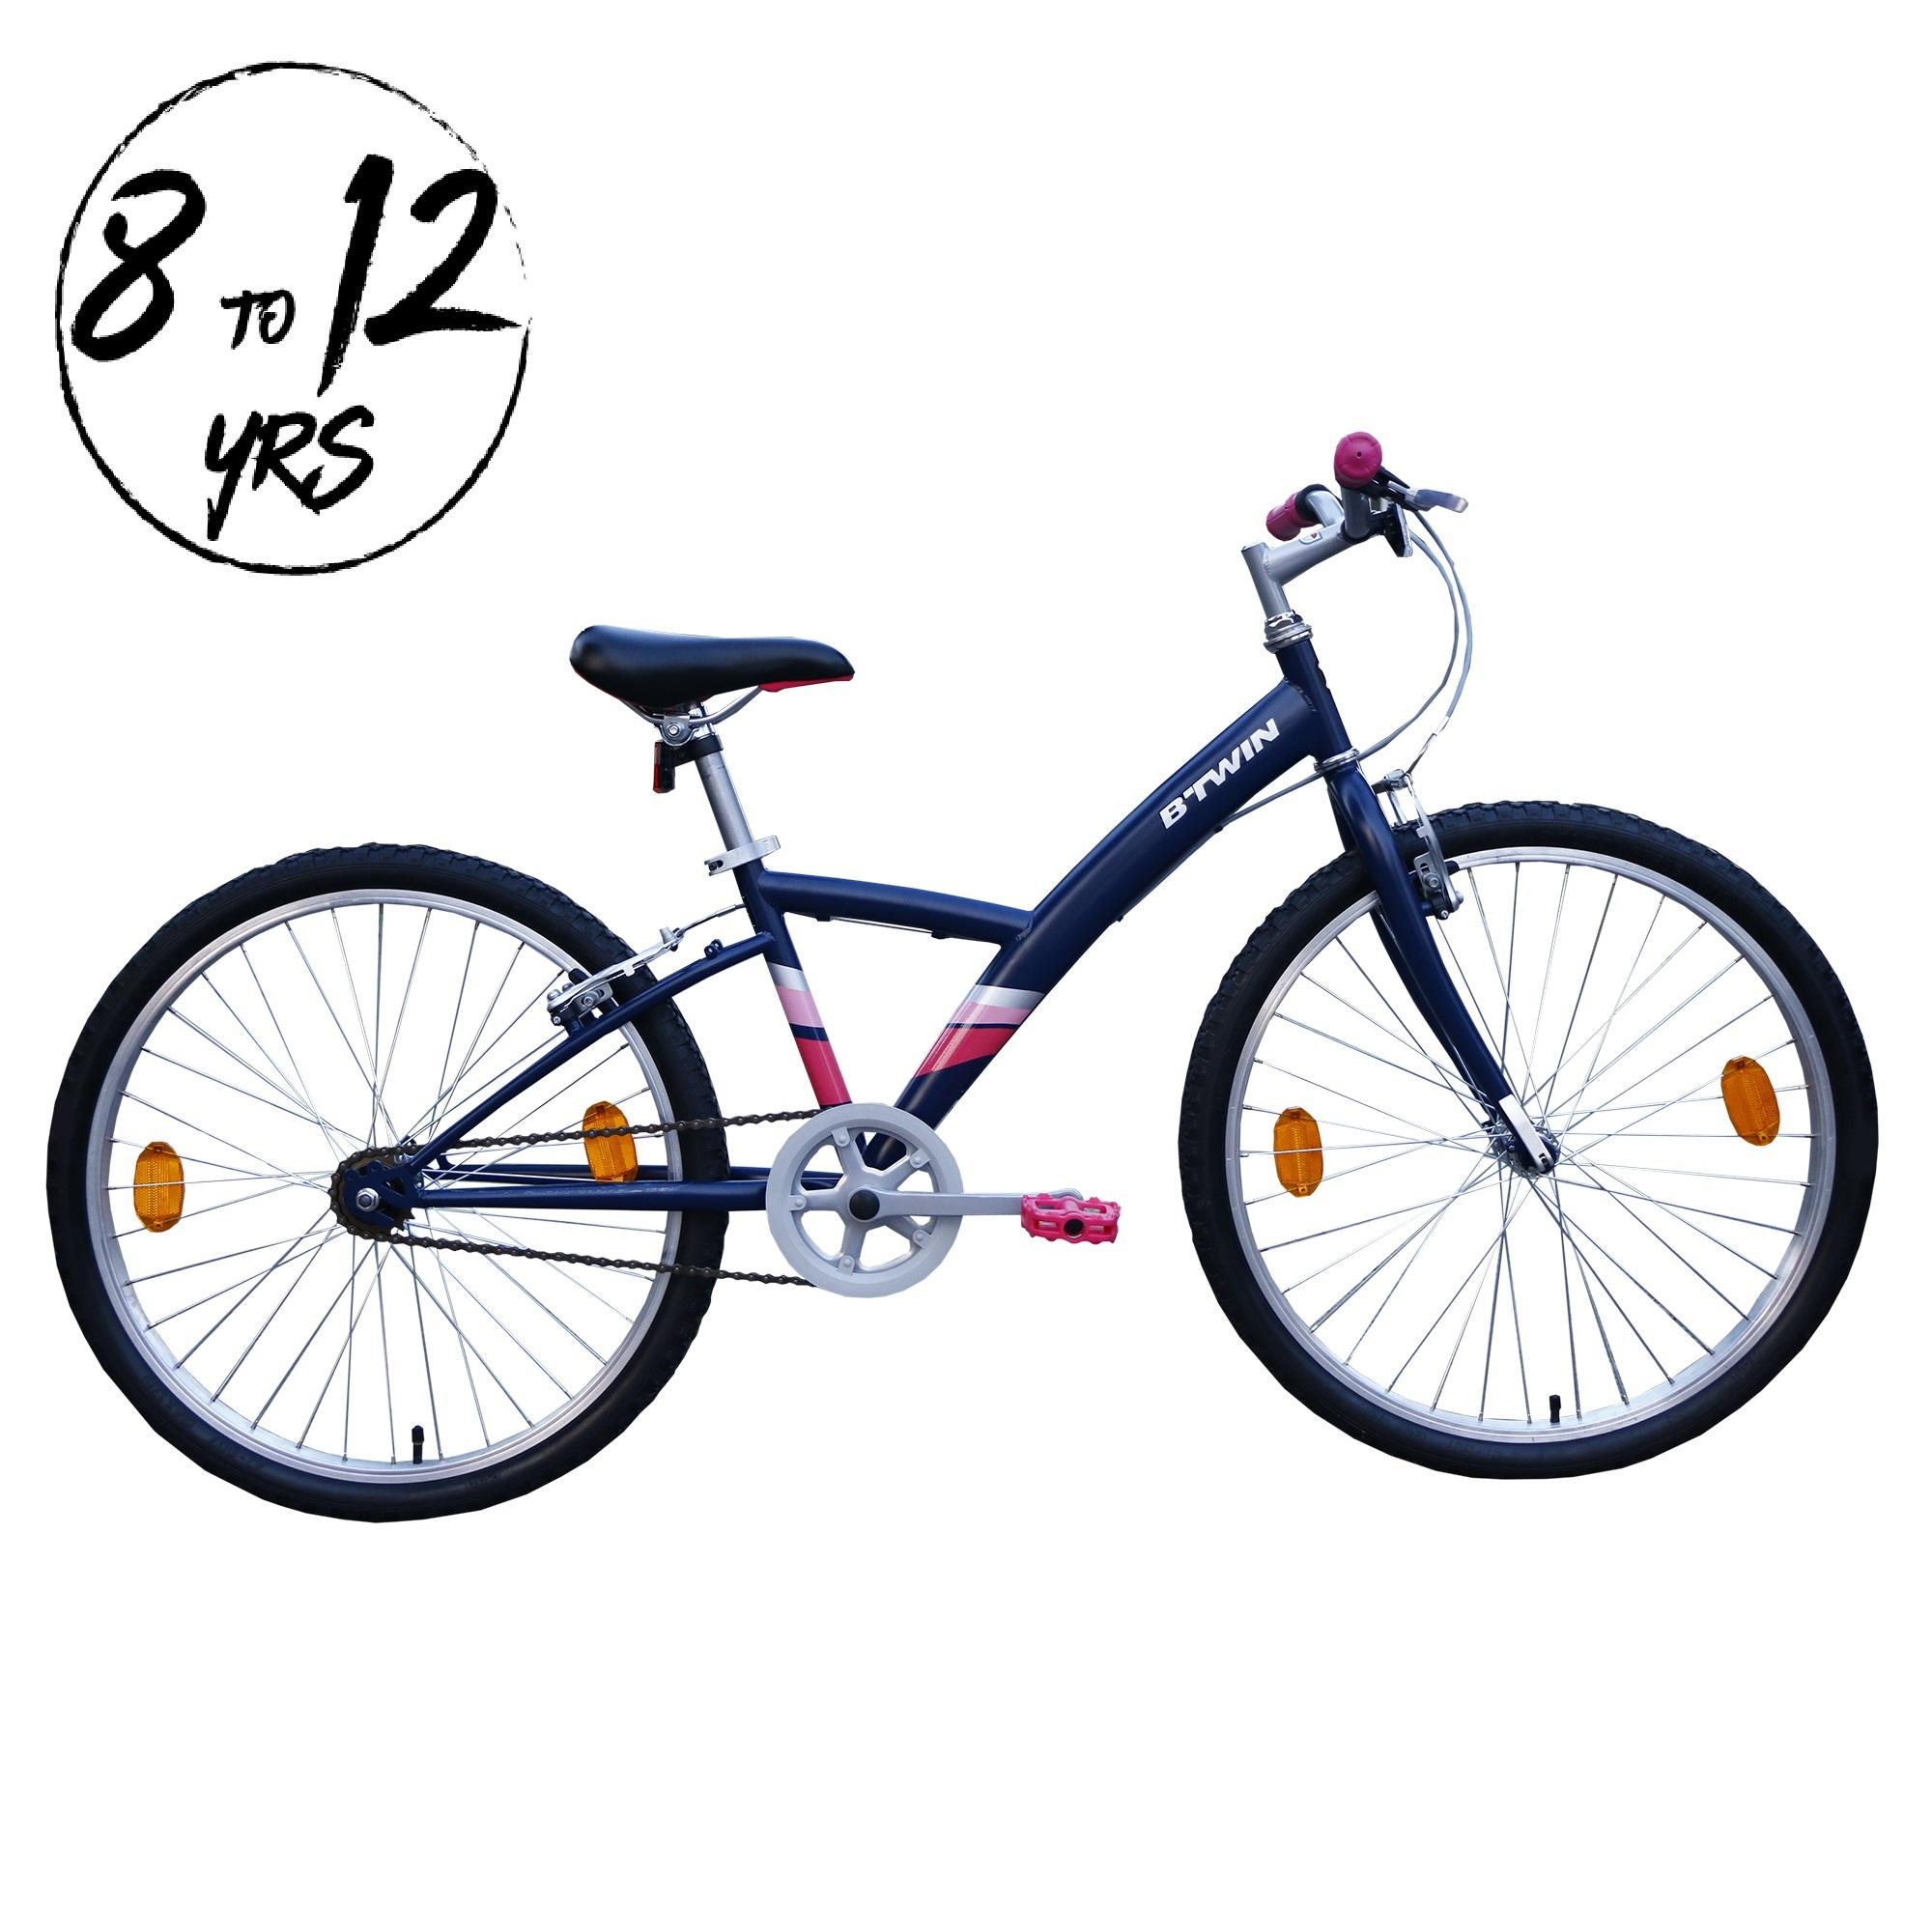 btwin cycle for kids